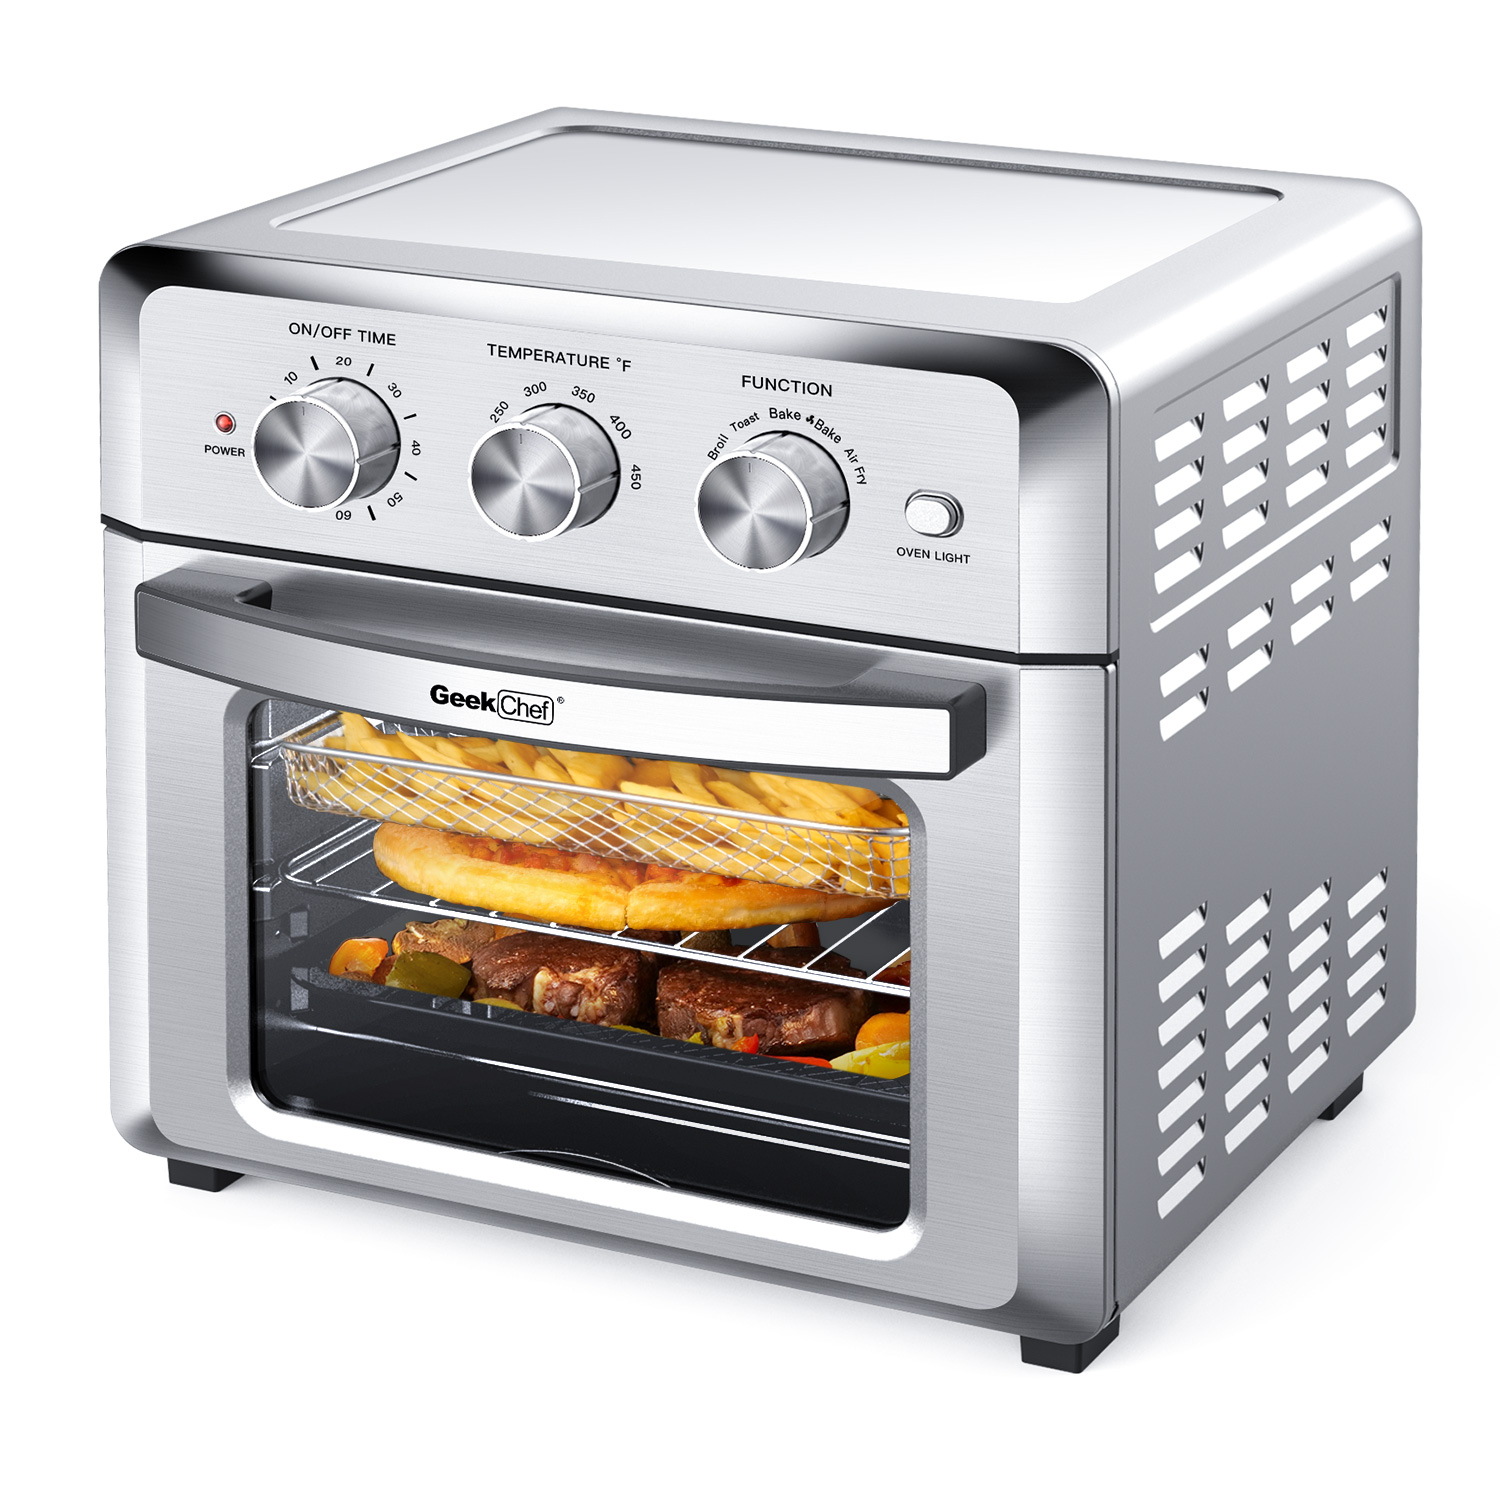 18L空气烤箱，空气炸锅Geek Chef Air Fryer Toaster Oven, 4 Slice 19QT Convection Airfryer Countertop Oven, Roast, Bake, Broil, Reheat, Fry Oil-Free, Cooking 4 Accessories Included, Stainless Steel,1500W